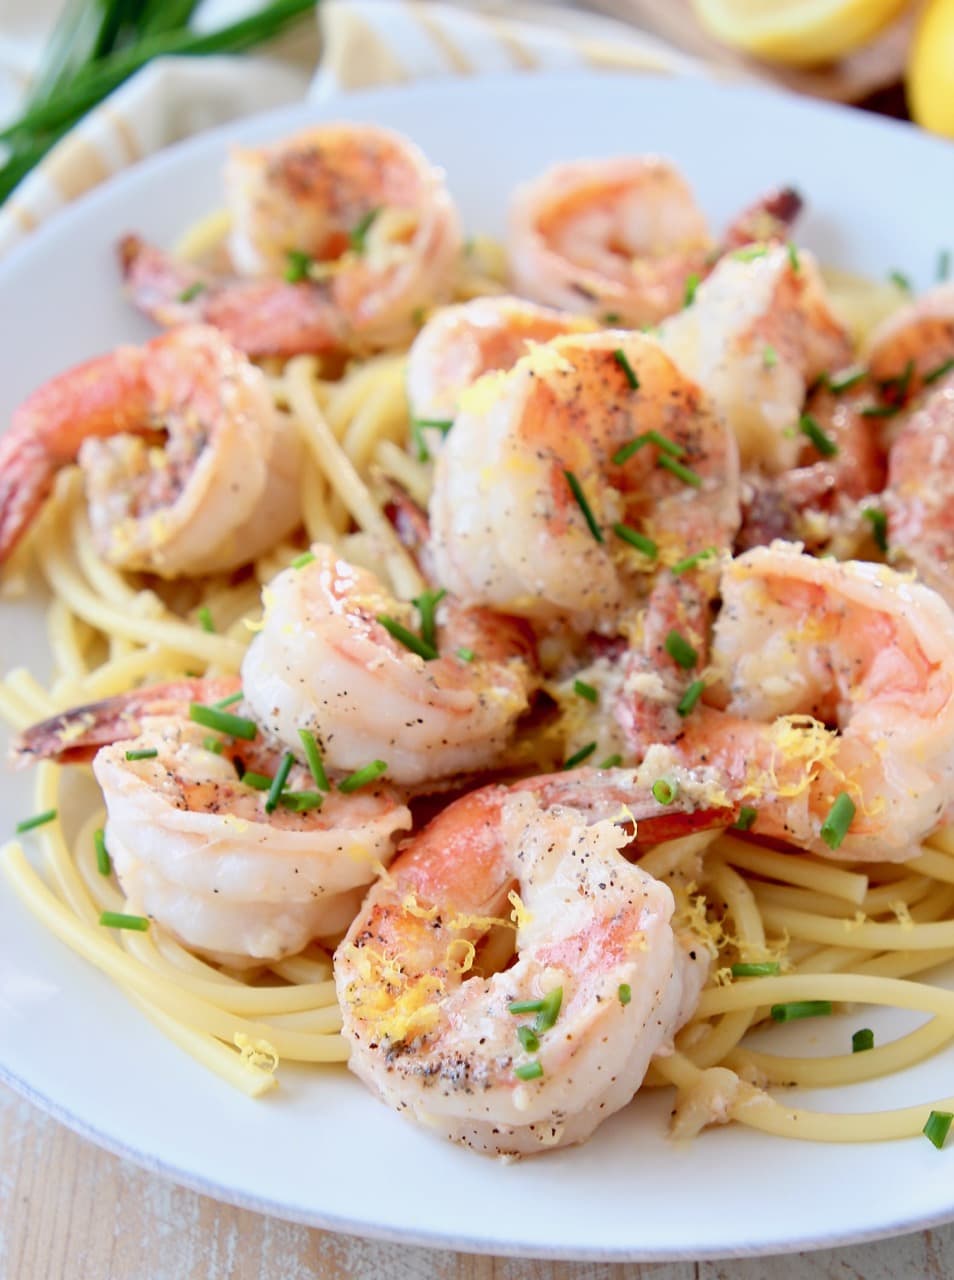 Shrimp over pasta, topped with chives and lemon zest on white plate